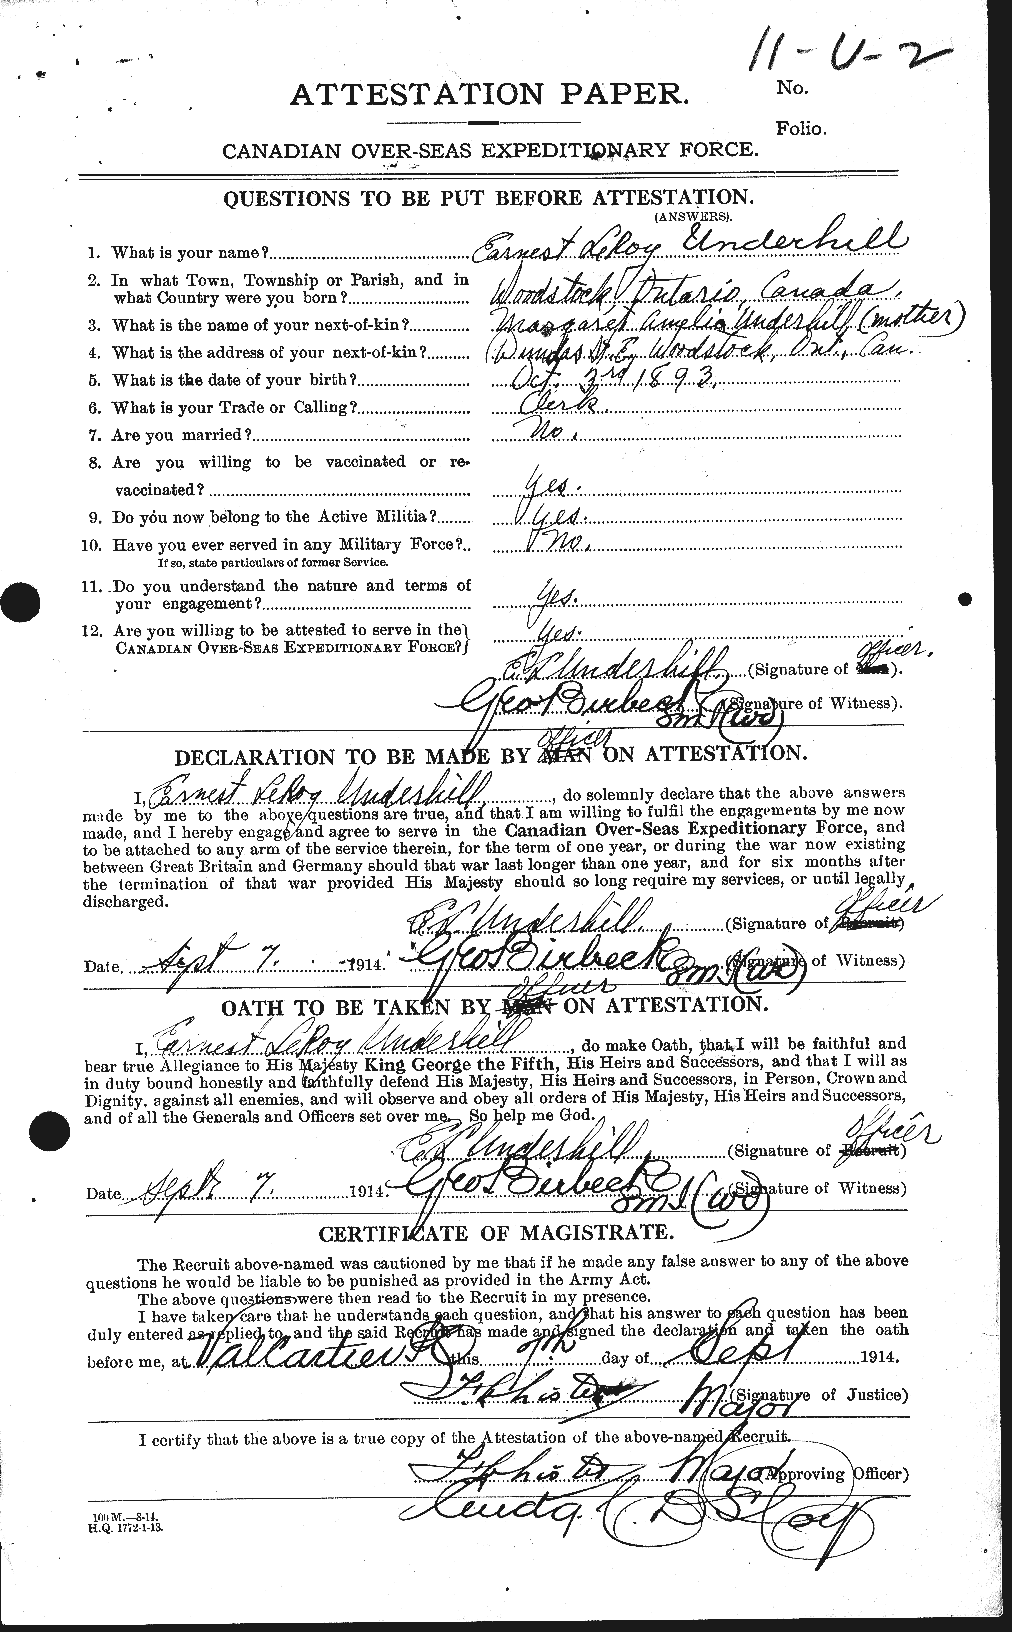 Personnel Records of the First World War - CEF 647080a